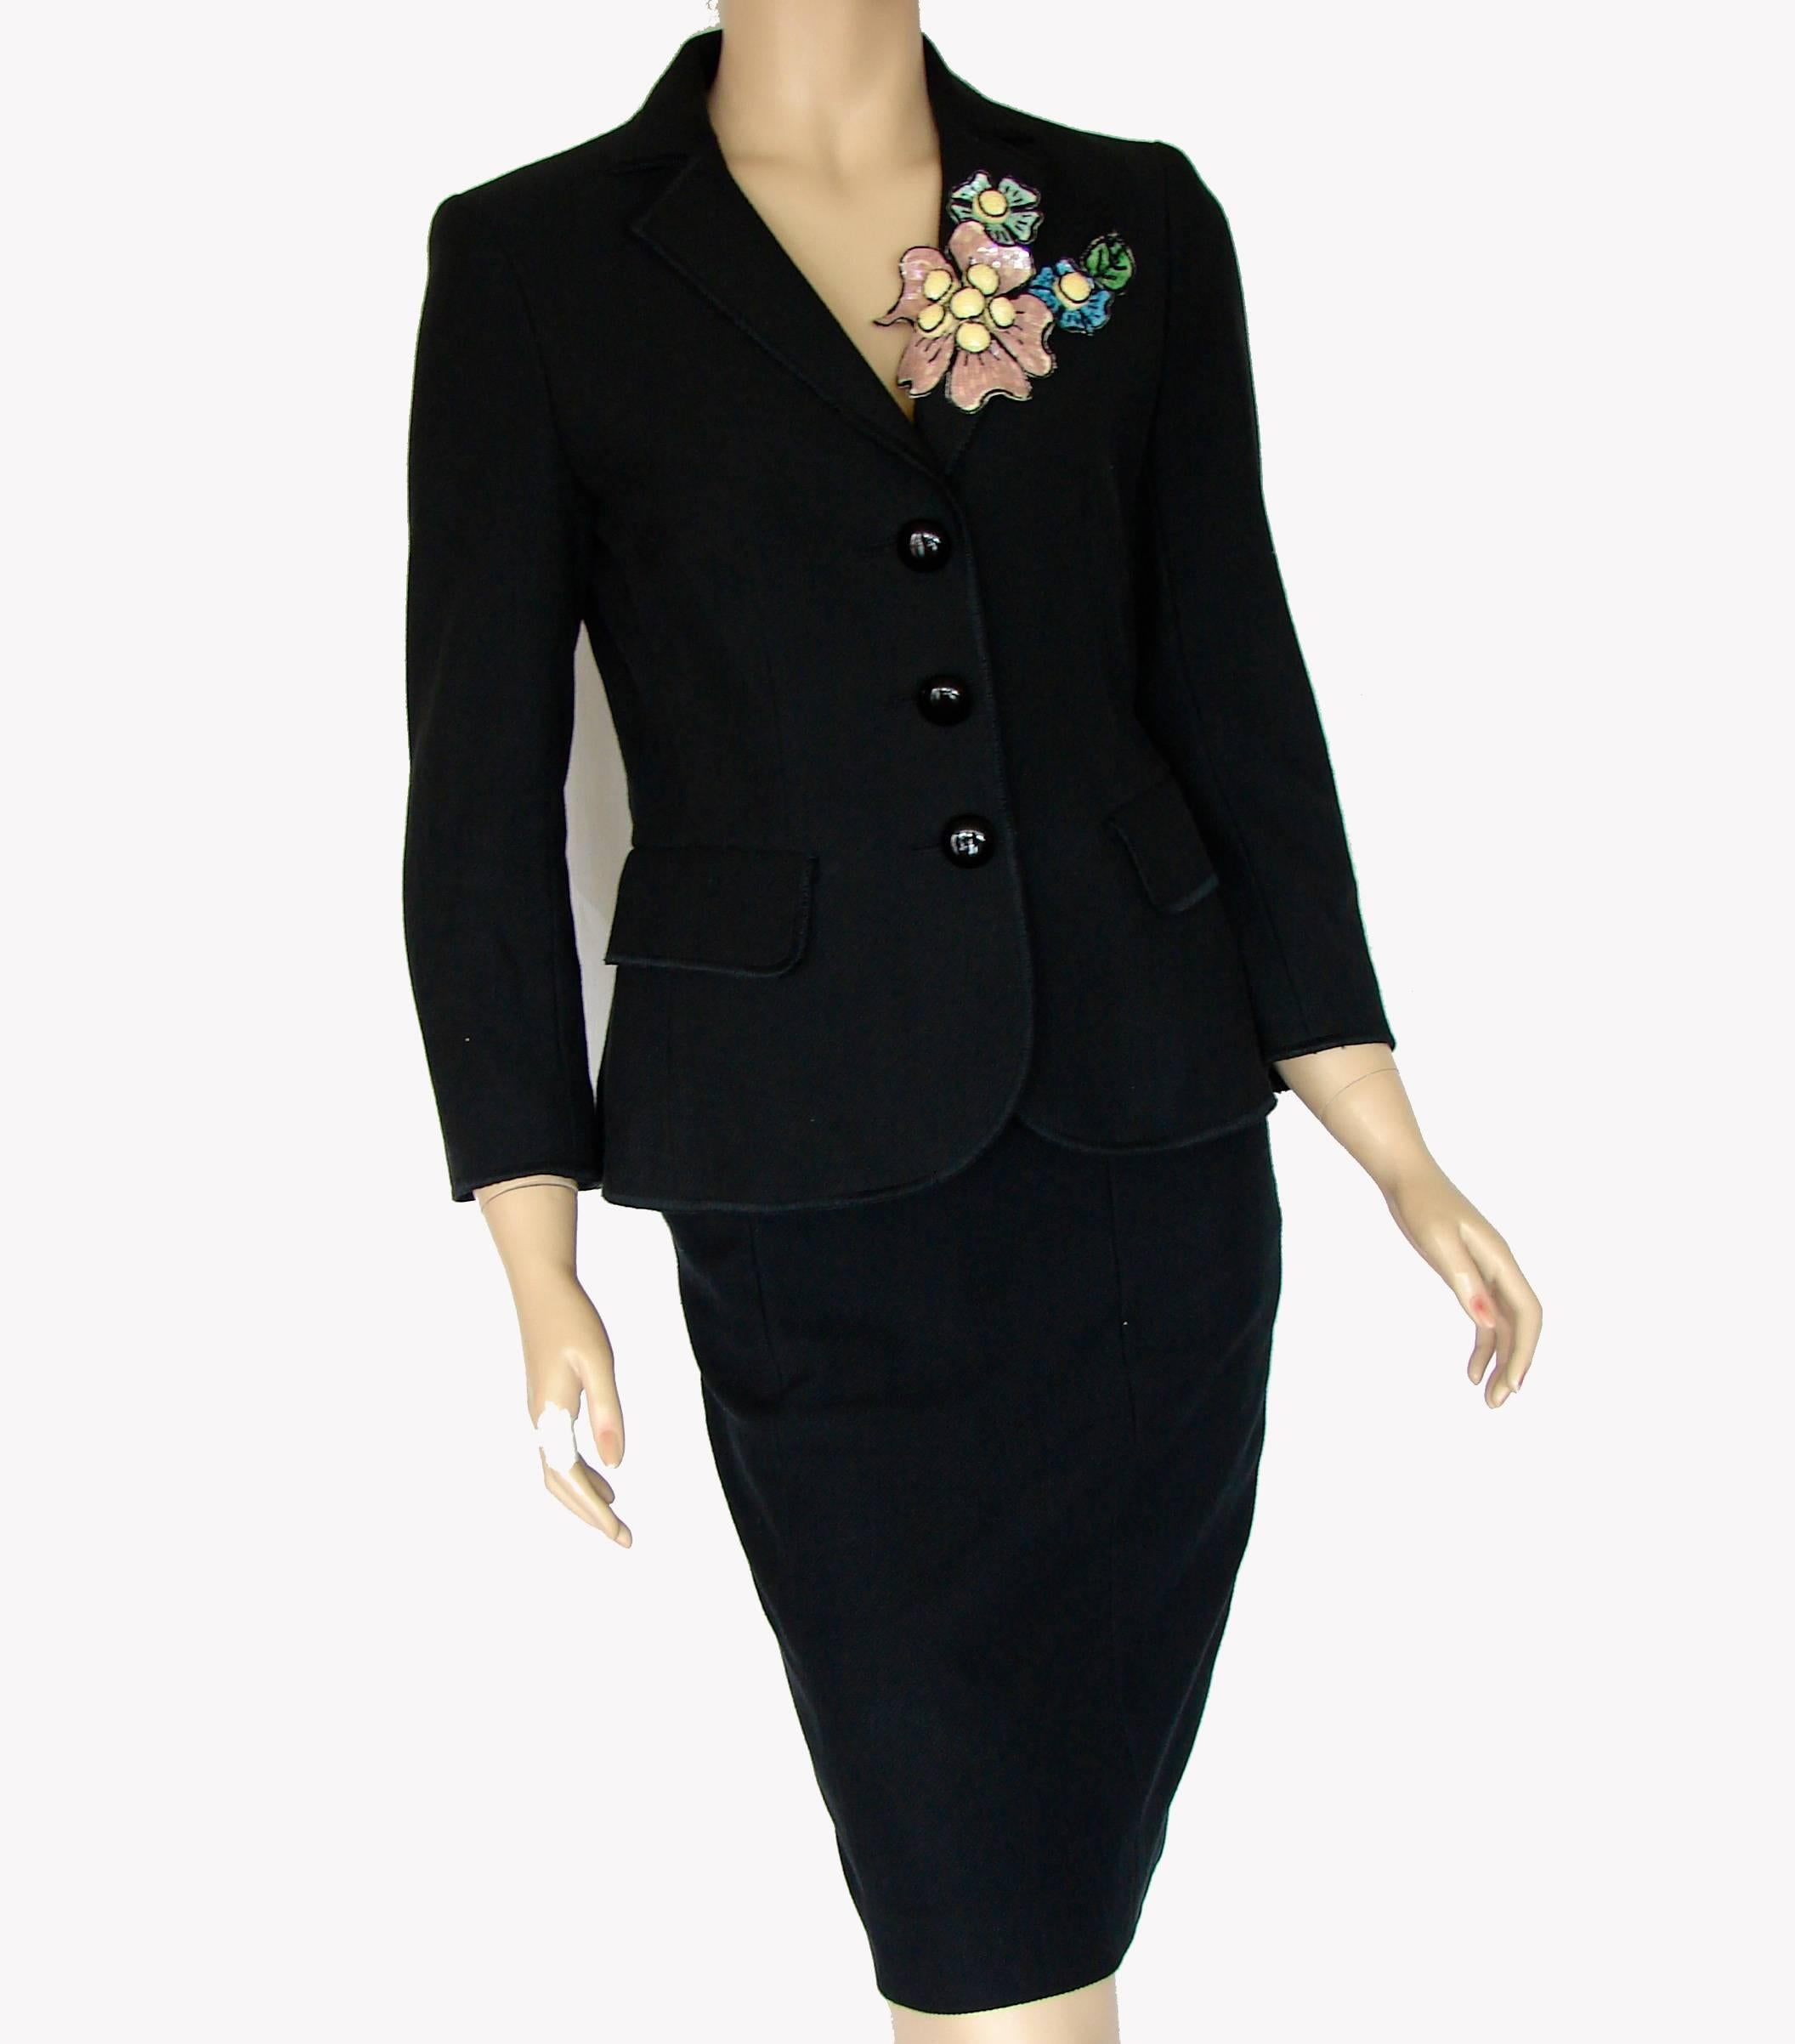 Women's Moschino Cheap & Chic Black Jacket & Skirt Suit Sequin Corsage US Size 4/6